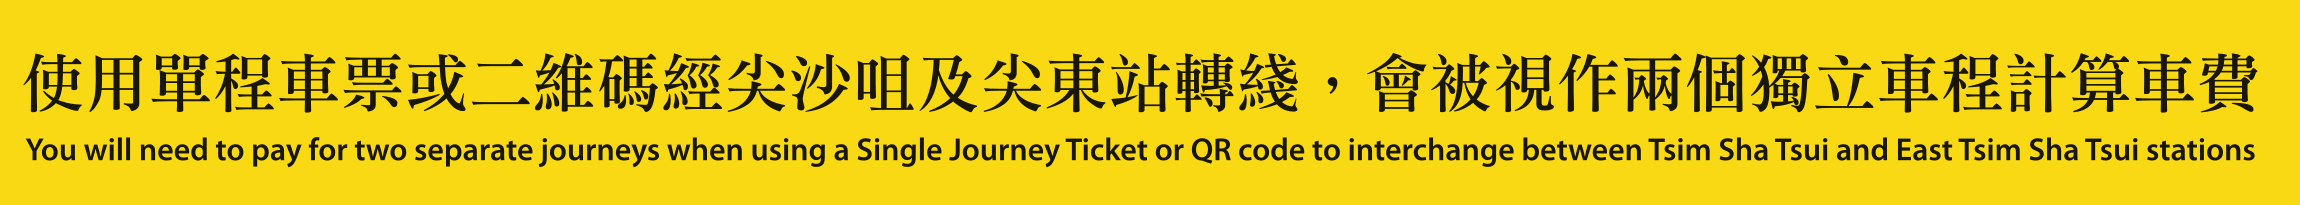 MTR sticker: You will need to pay for two separate journeys when using a Single Journey Ticket or QR Code to interchange between Tsim Sha Tsui and East Tsim Sha Tsui stations